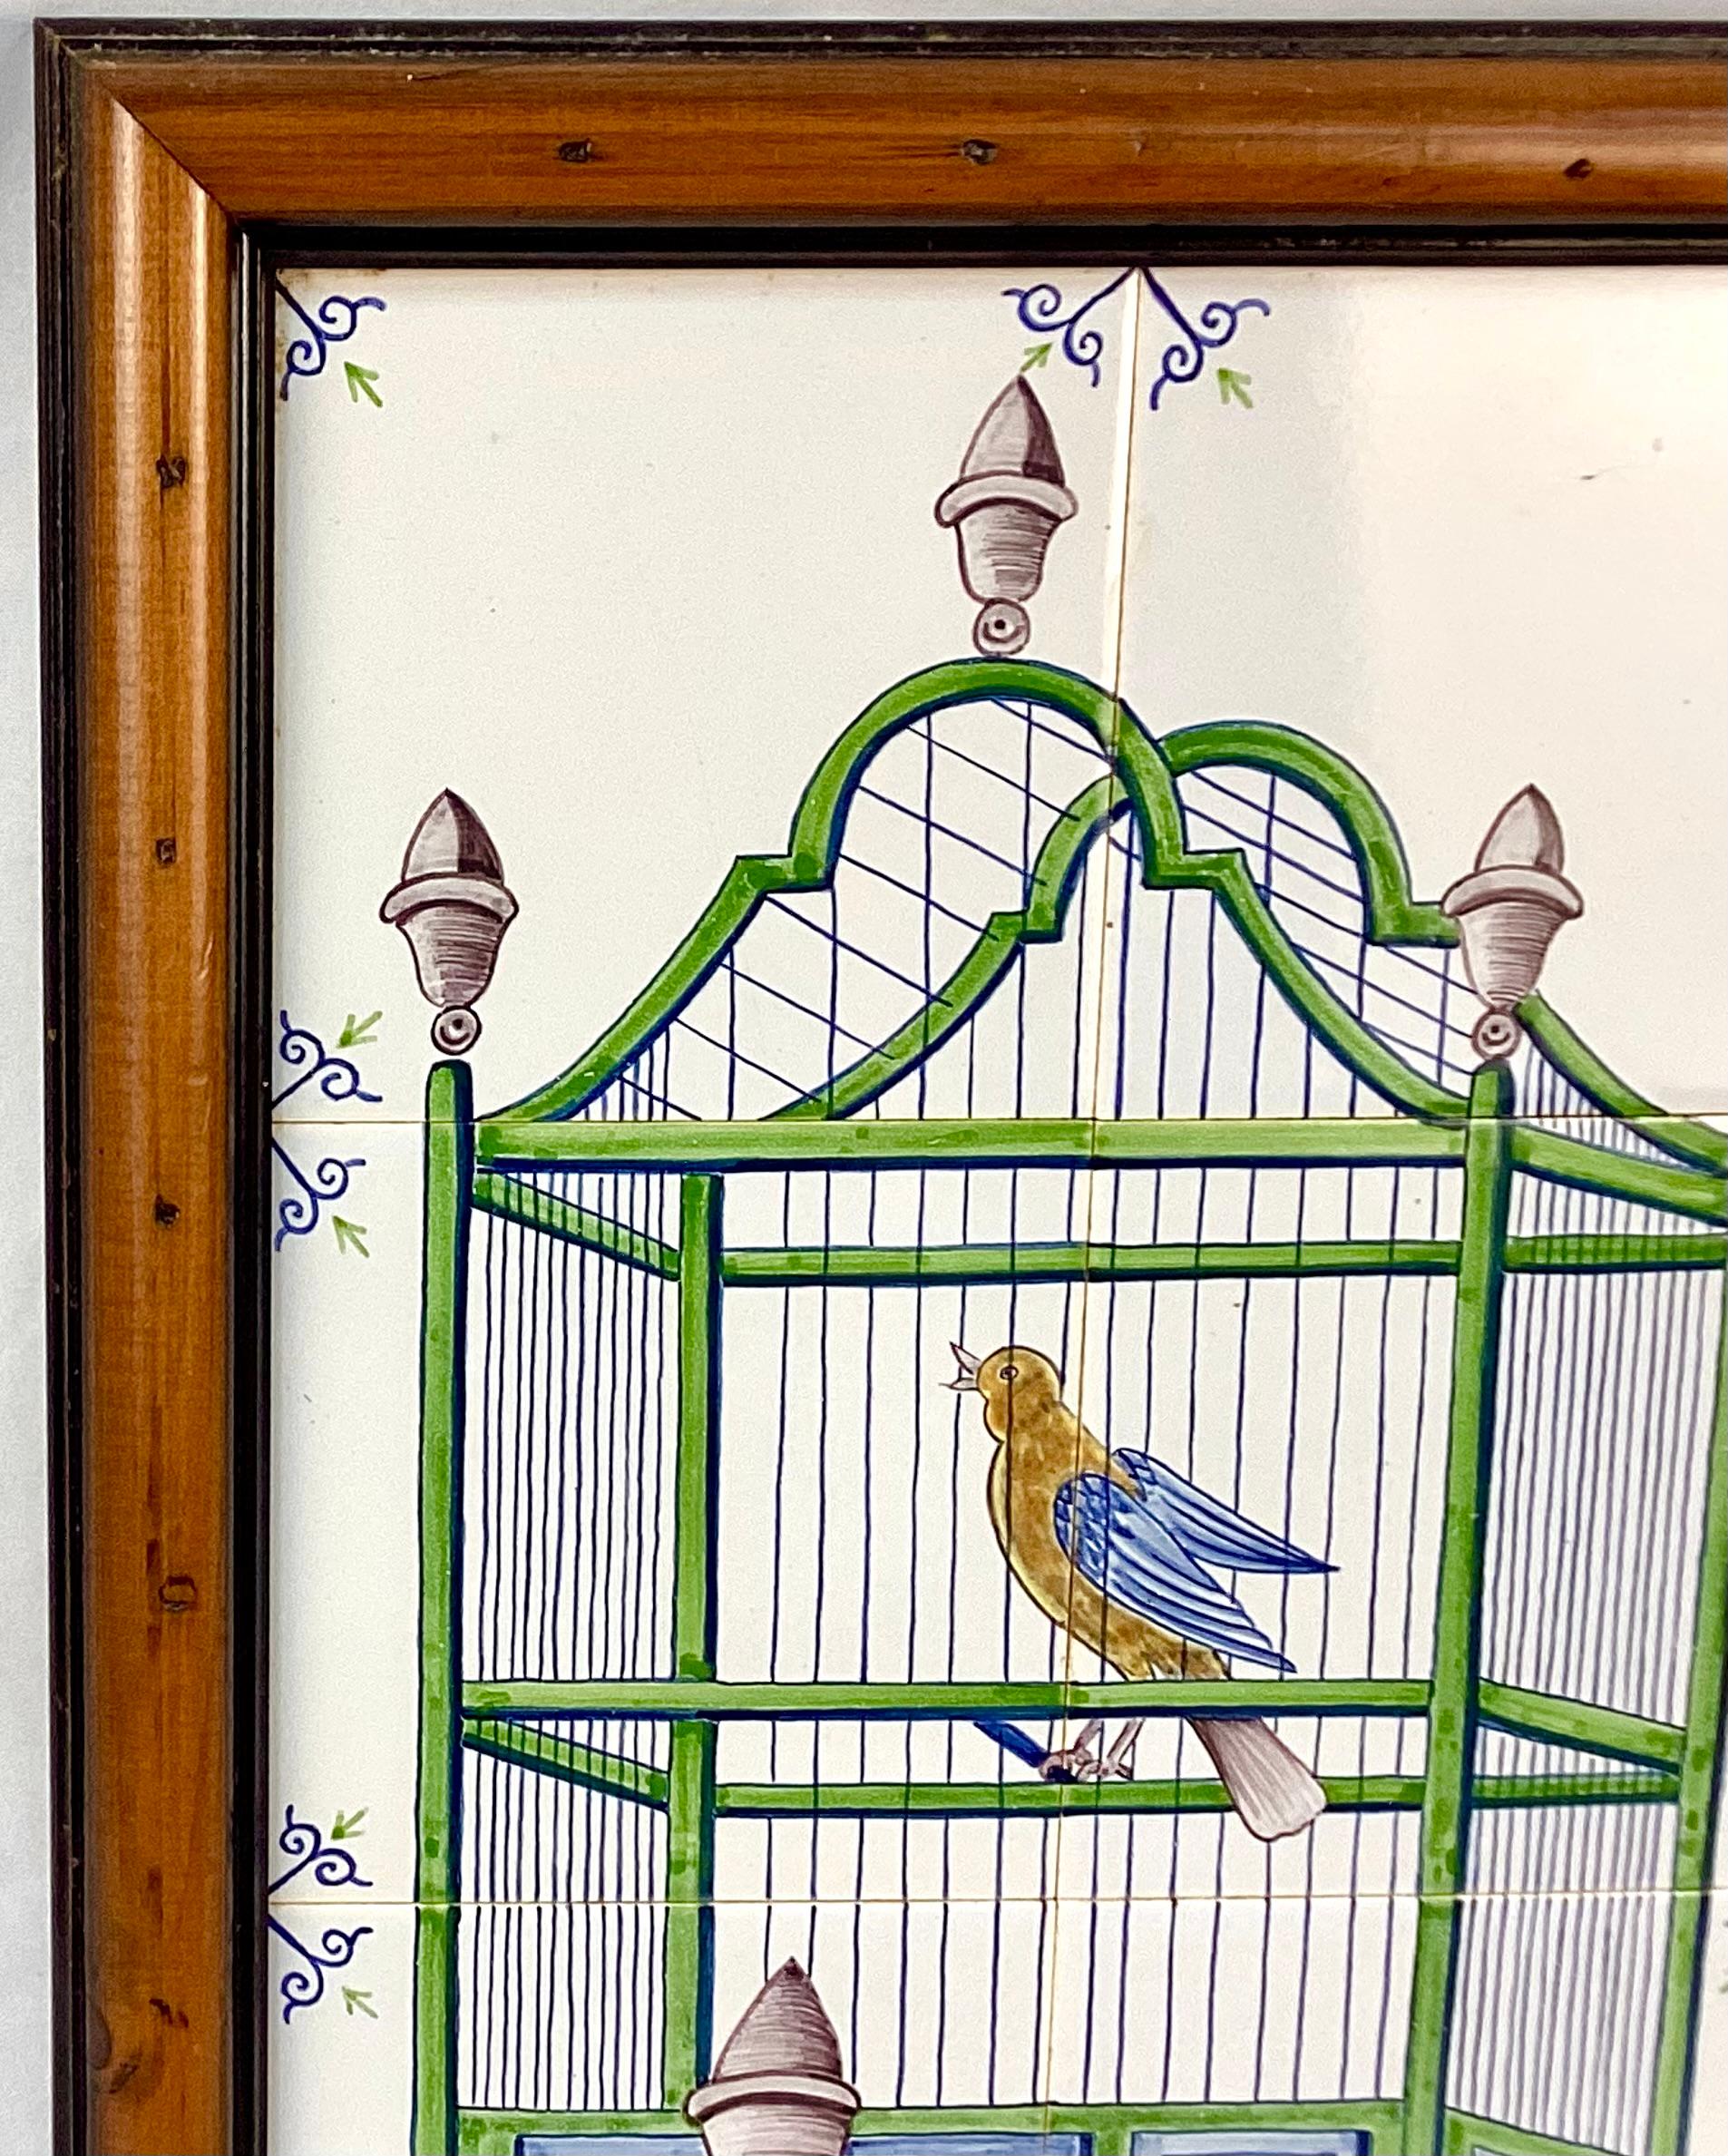 Delft 18th Century style tiles featuring a bird in a cage. Mural has six approximately 5 x 5 tiles. These are painted with a green and blue bird cage and yellow and blue bird perched inside with gray finials and a gray water bowl mounted in a custom